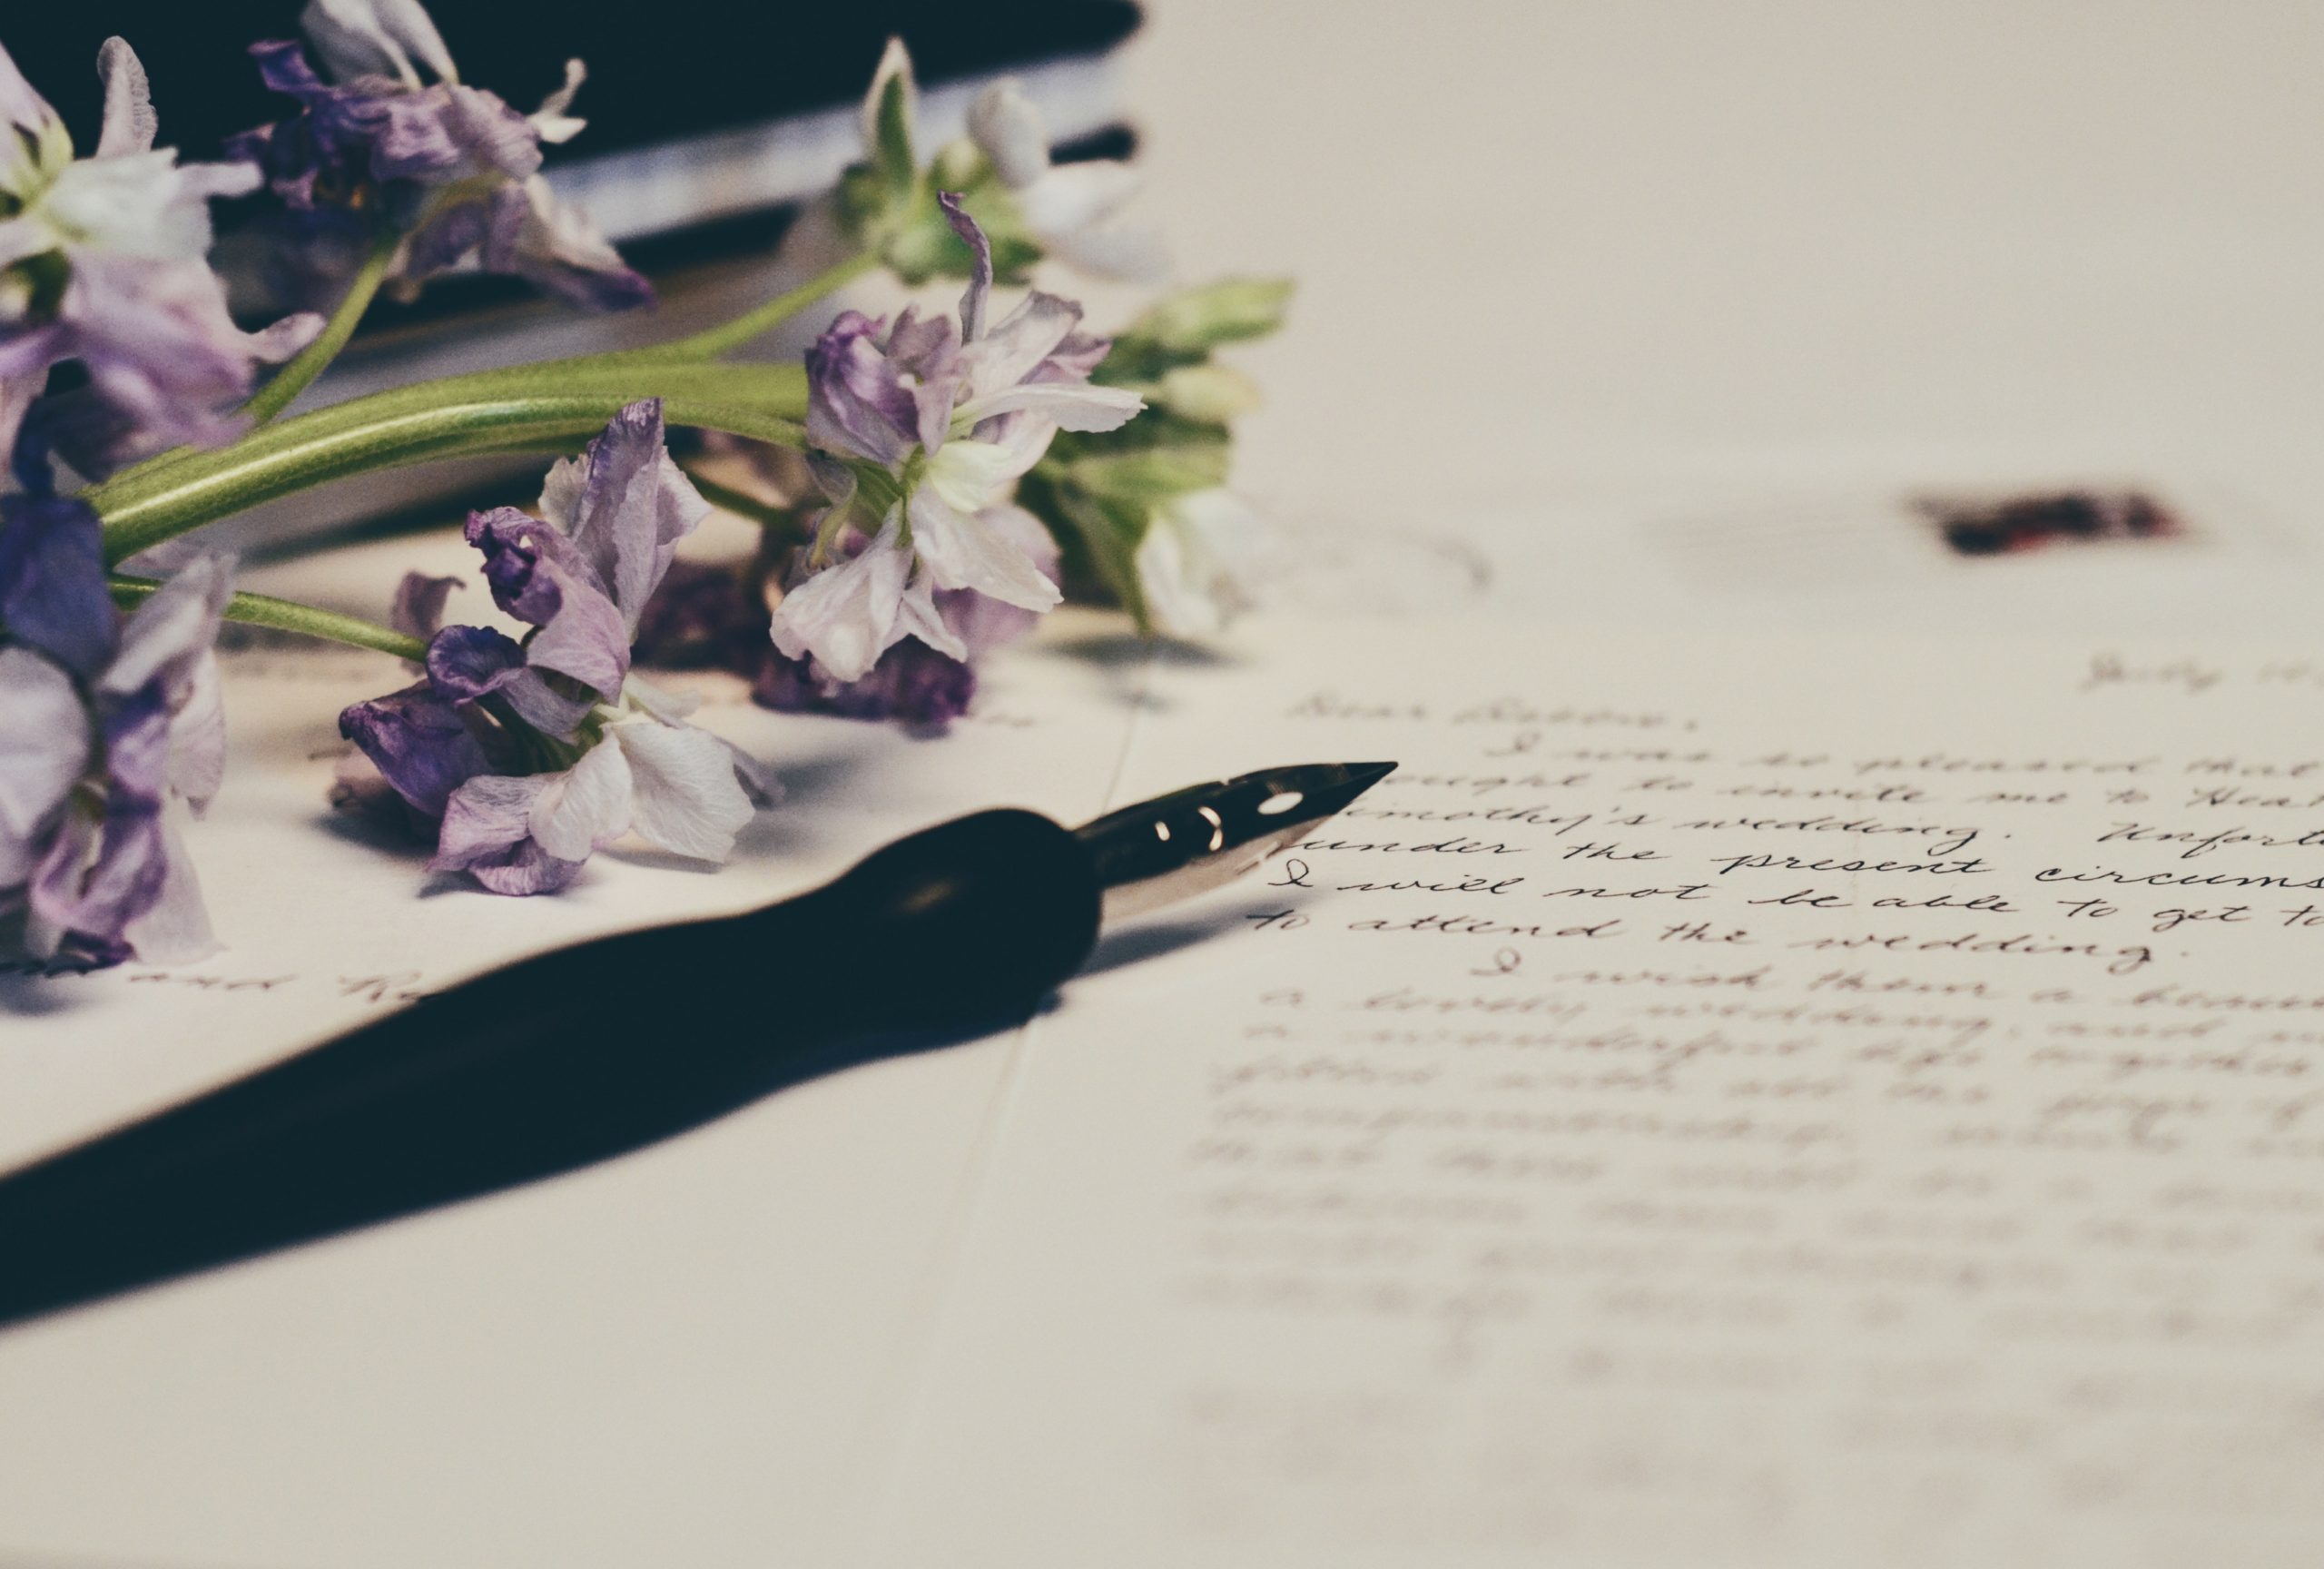 A quill and lavender flowers sitting on type of a cursive handwritten letter